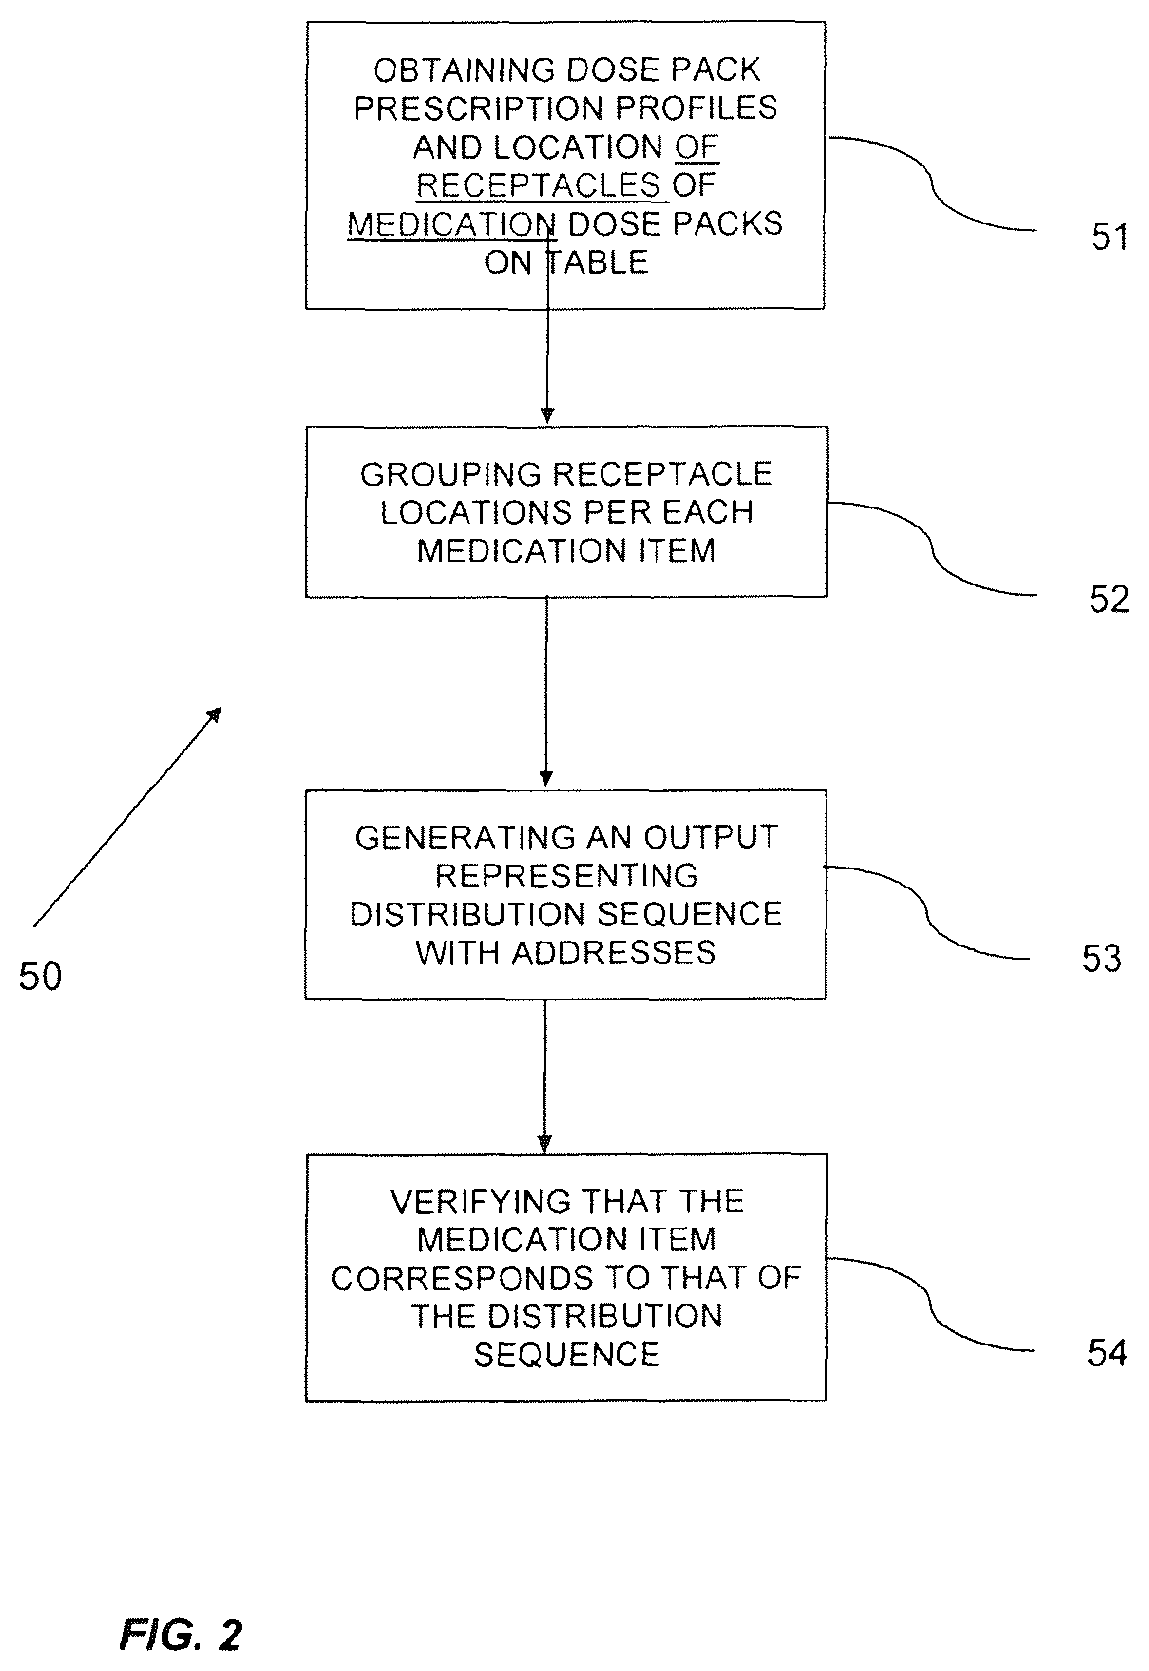 System for assisting the preparation of medication dose packs and methods